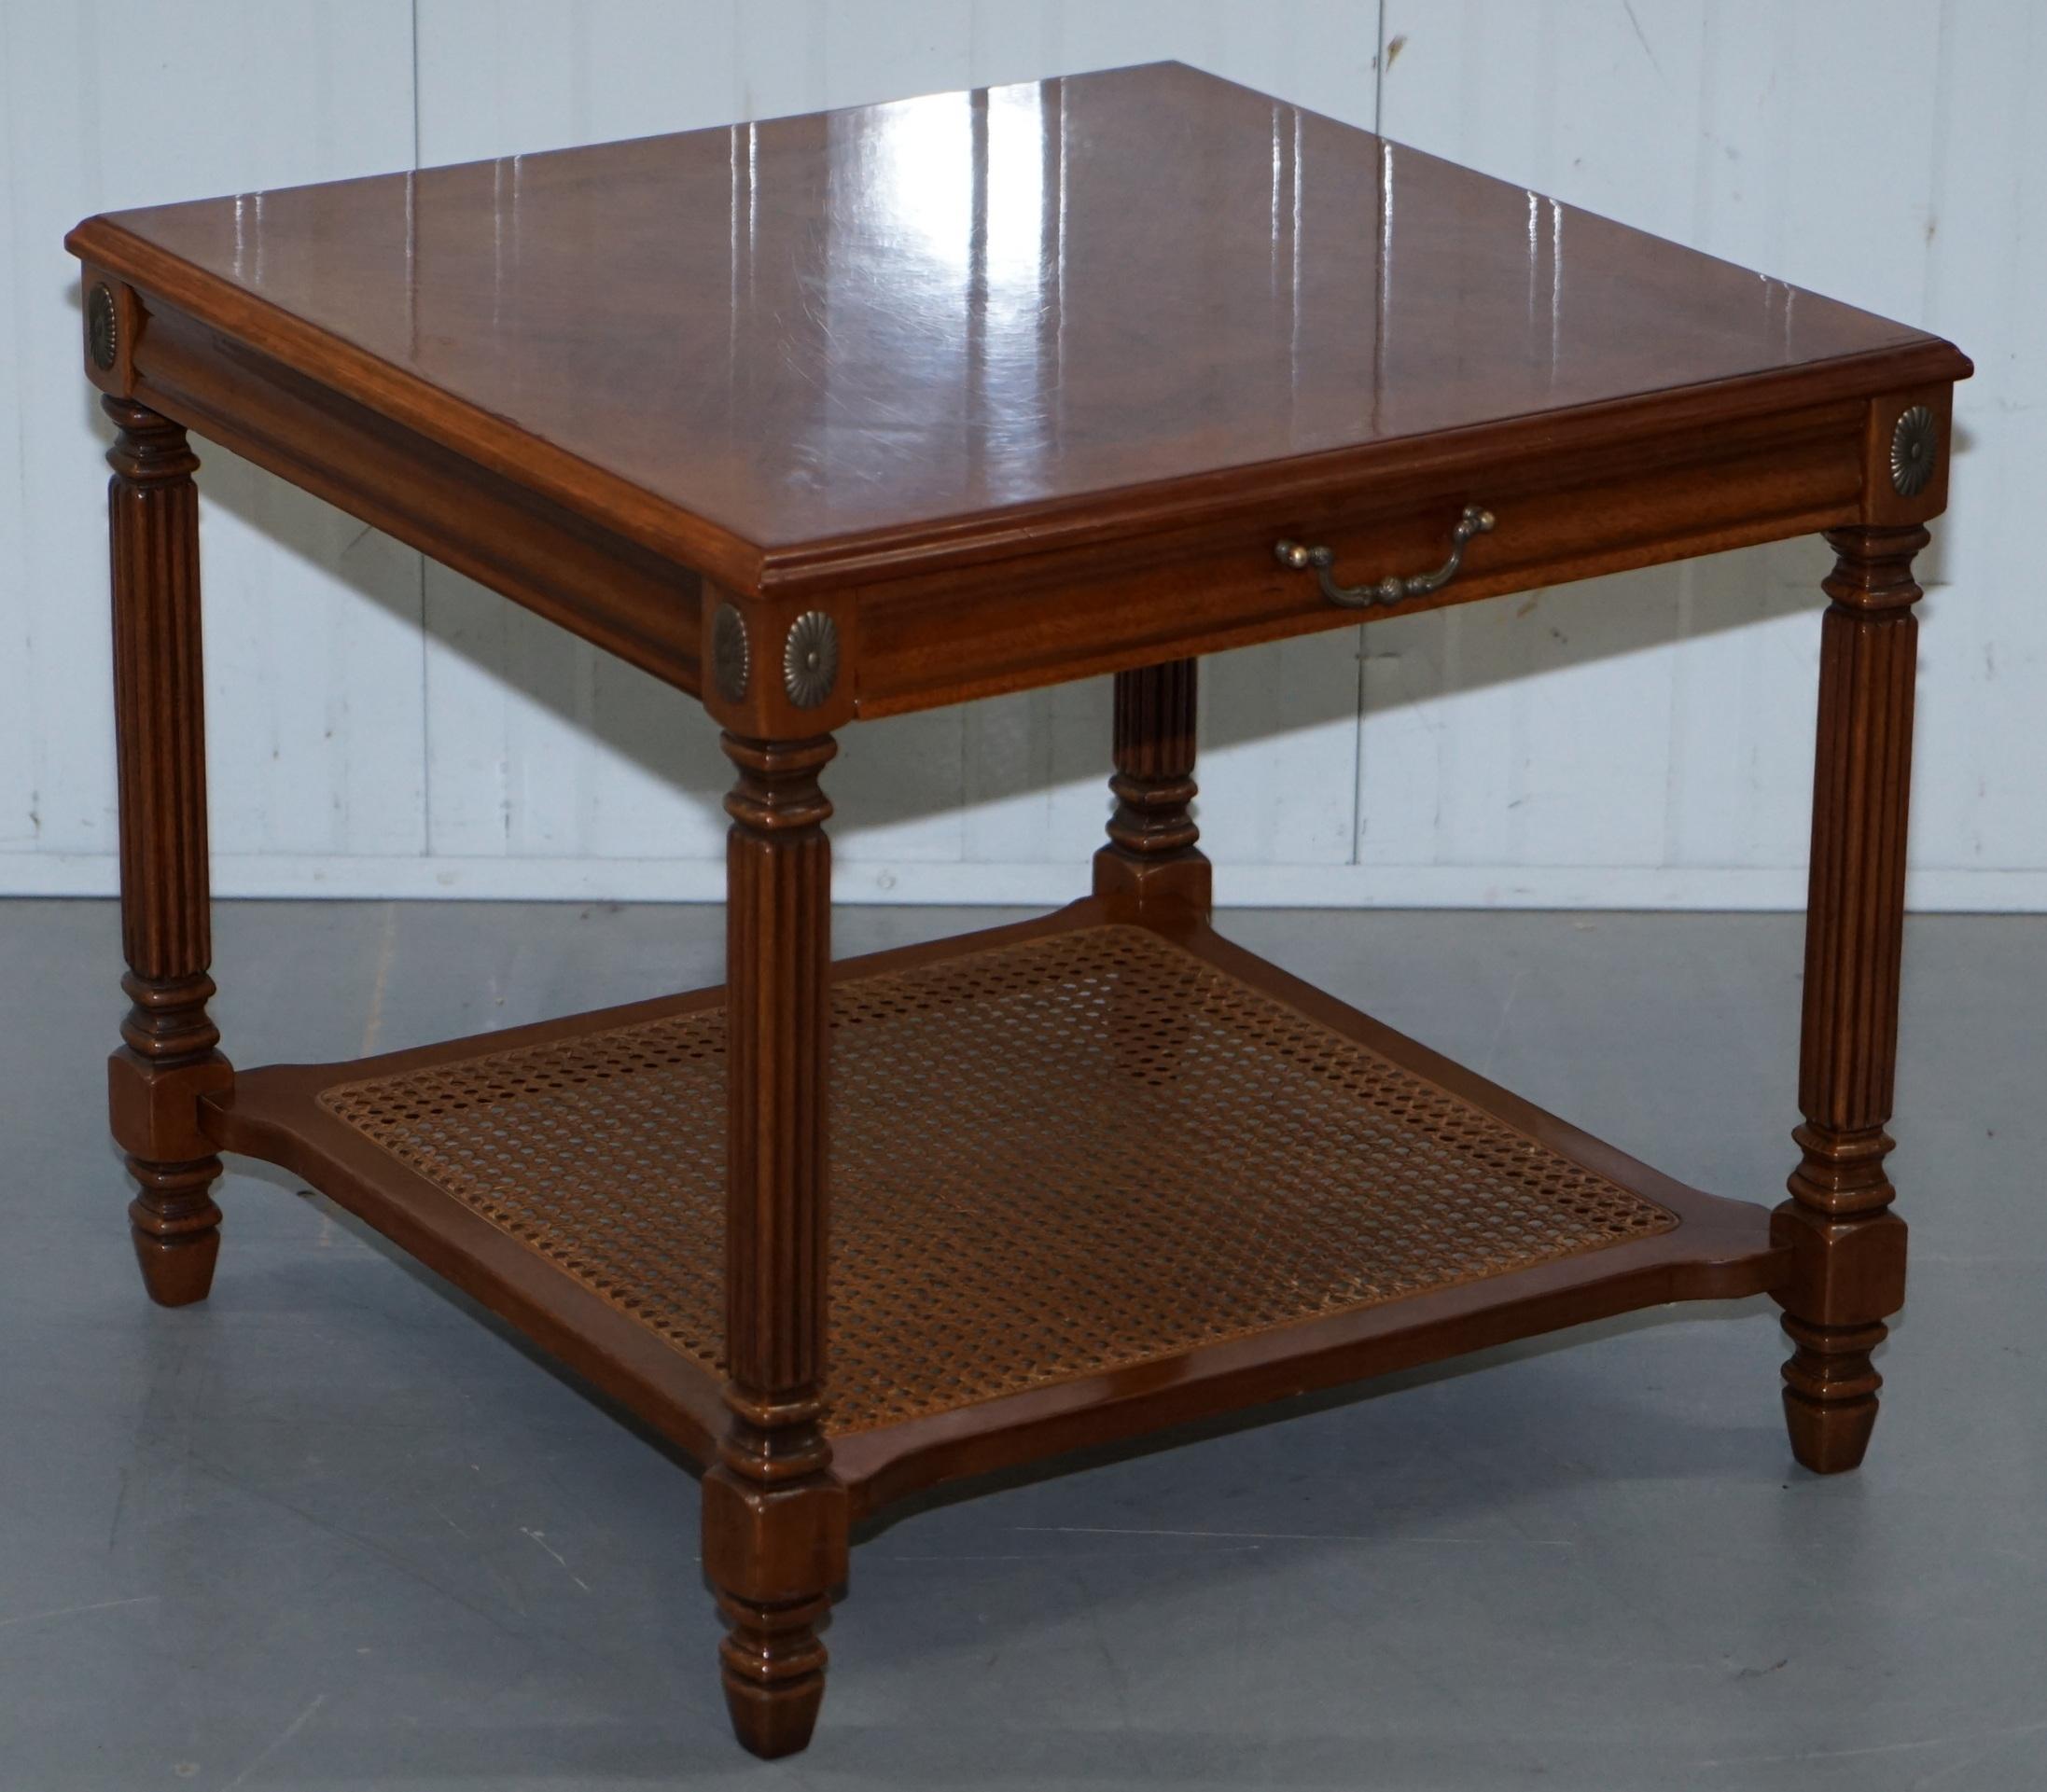 We are delighted to offer for sale this stunning pair of Grange France cherrywood with berger base and single drawers side tables RRP £3500

A good looking and well made pair, the berger base is very nice, the legs are readed like Gillows and they